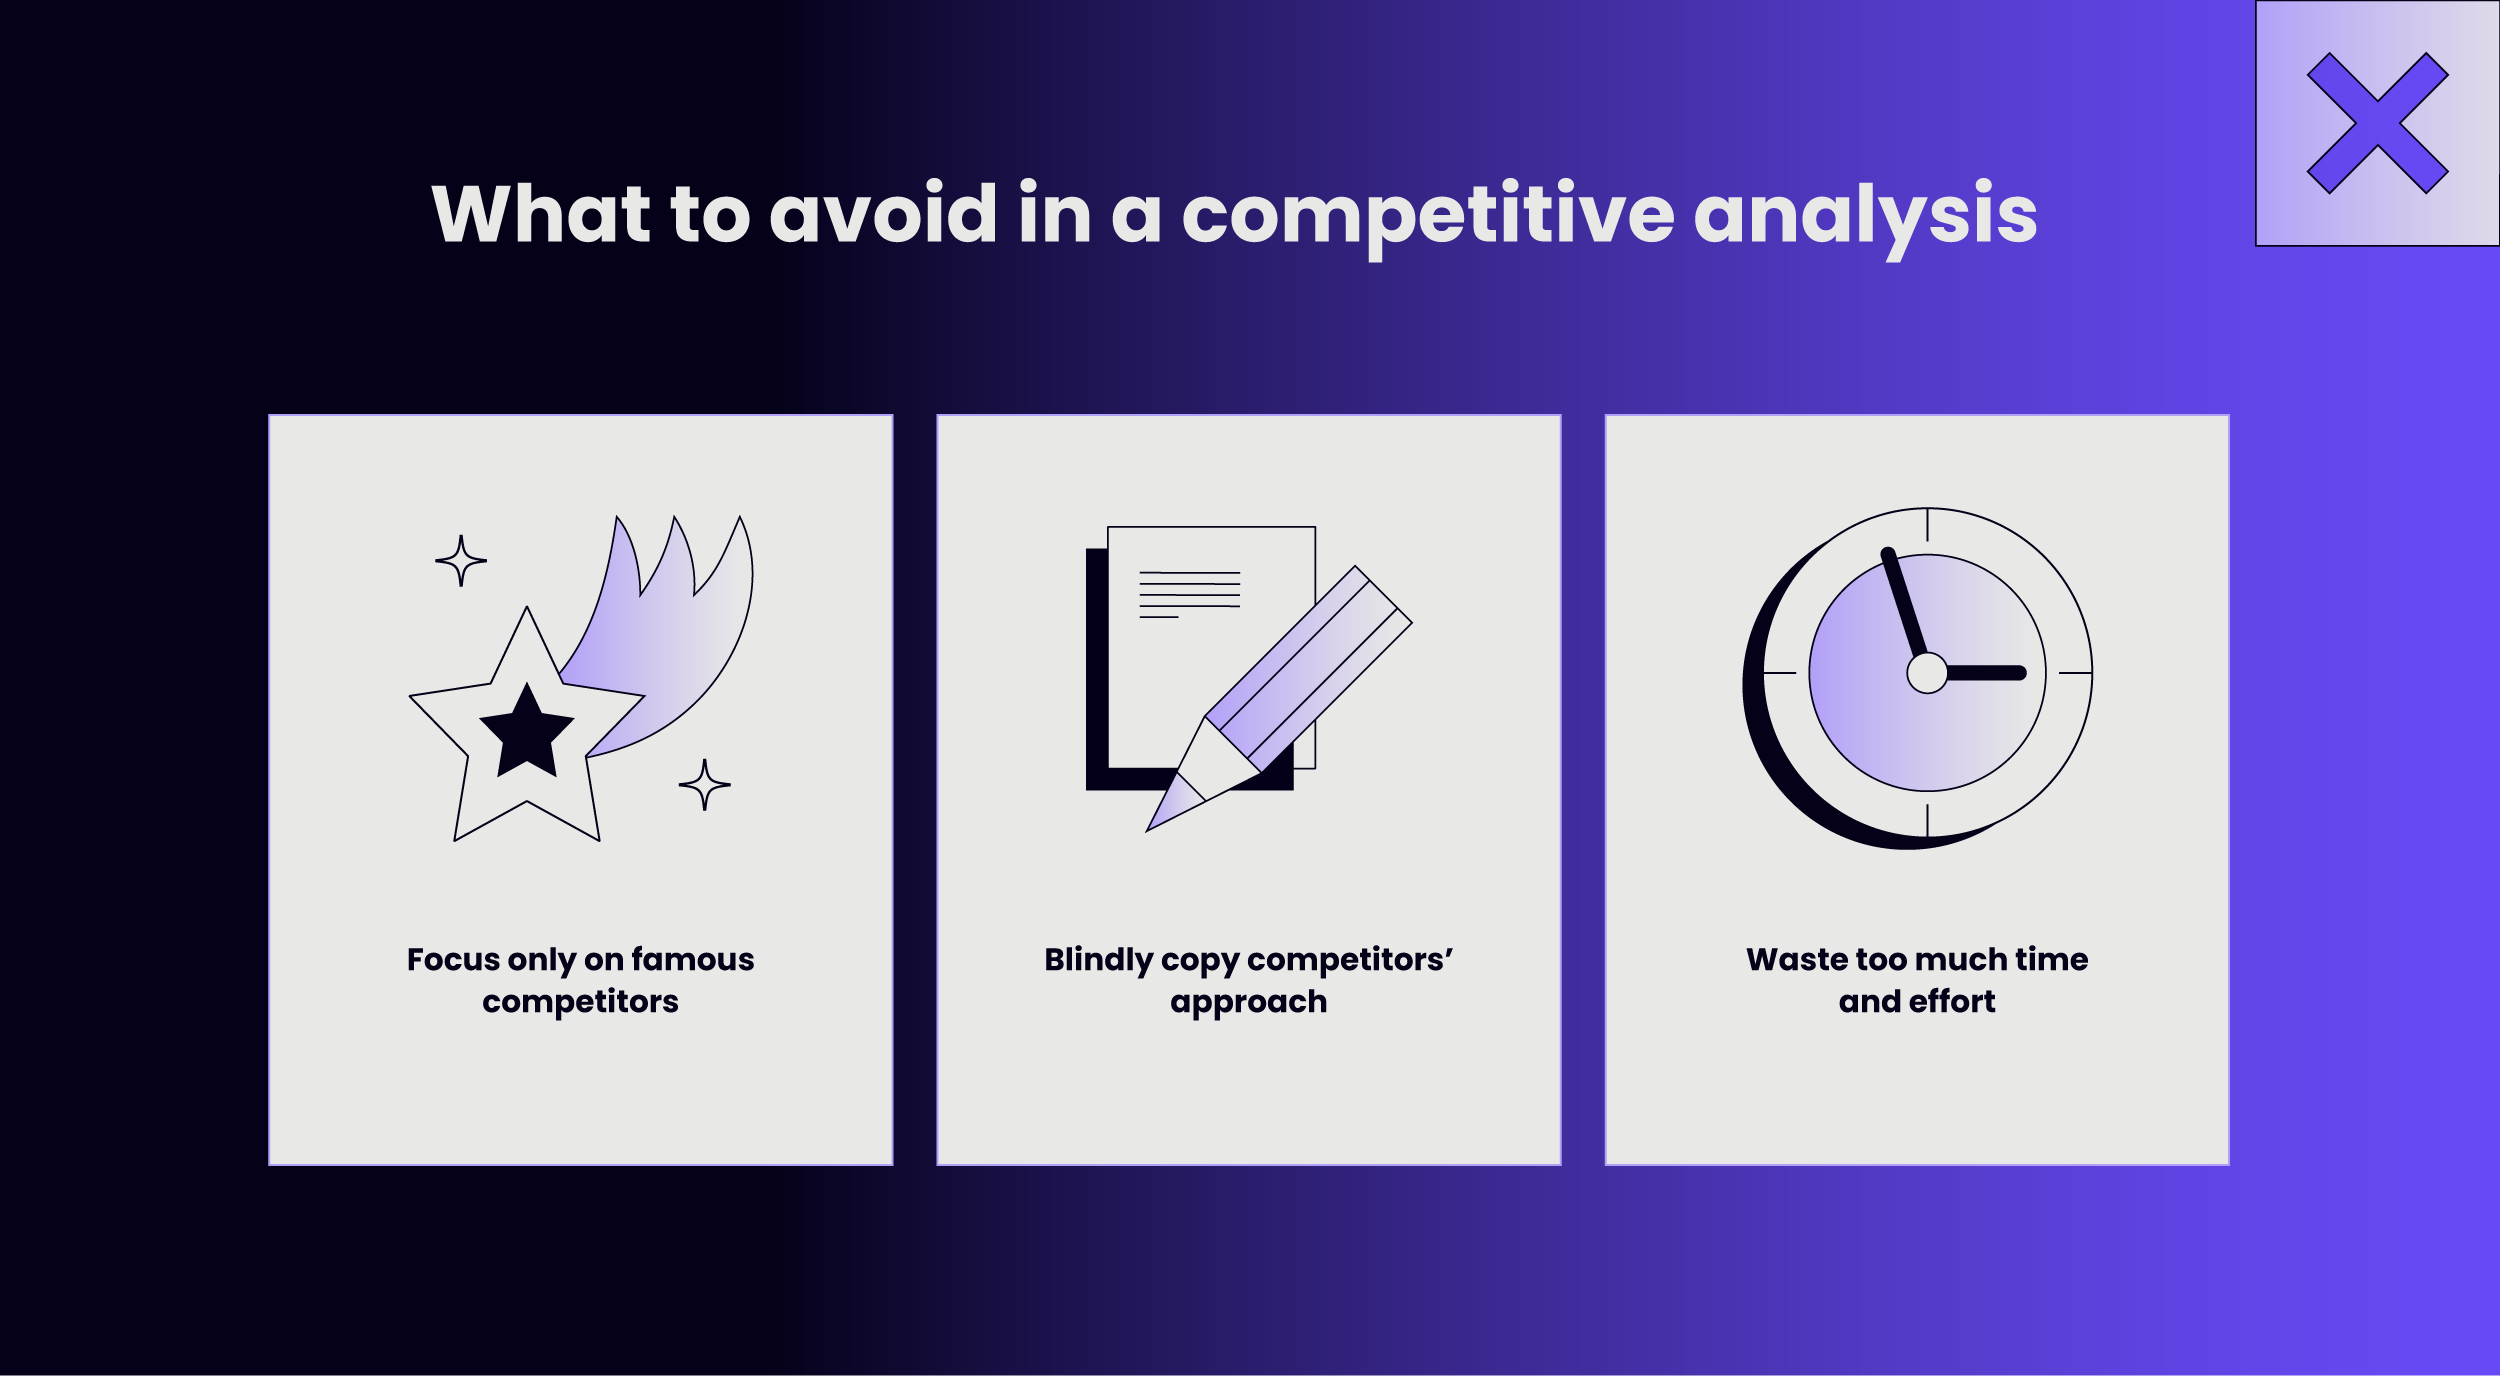 Image shows three things to avoid in a competitor analysis: focusing on famous competitors, copying other companies, and wasting time and effort.